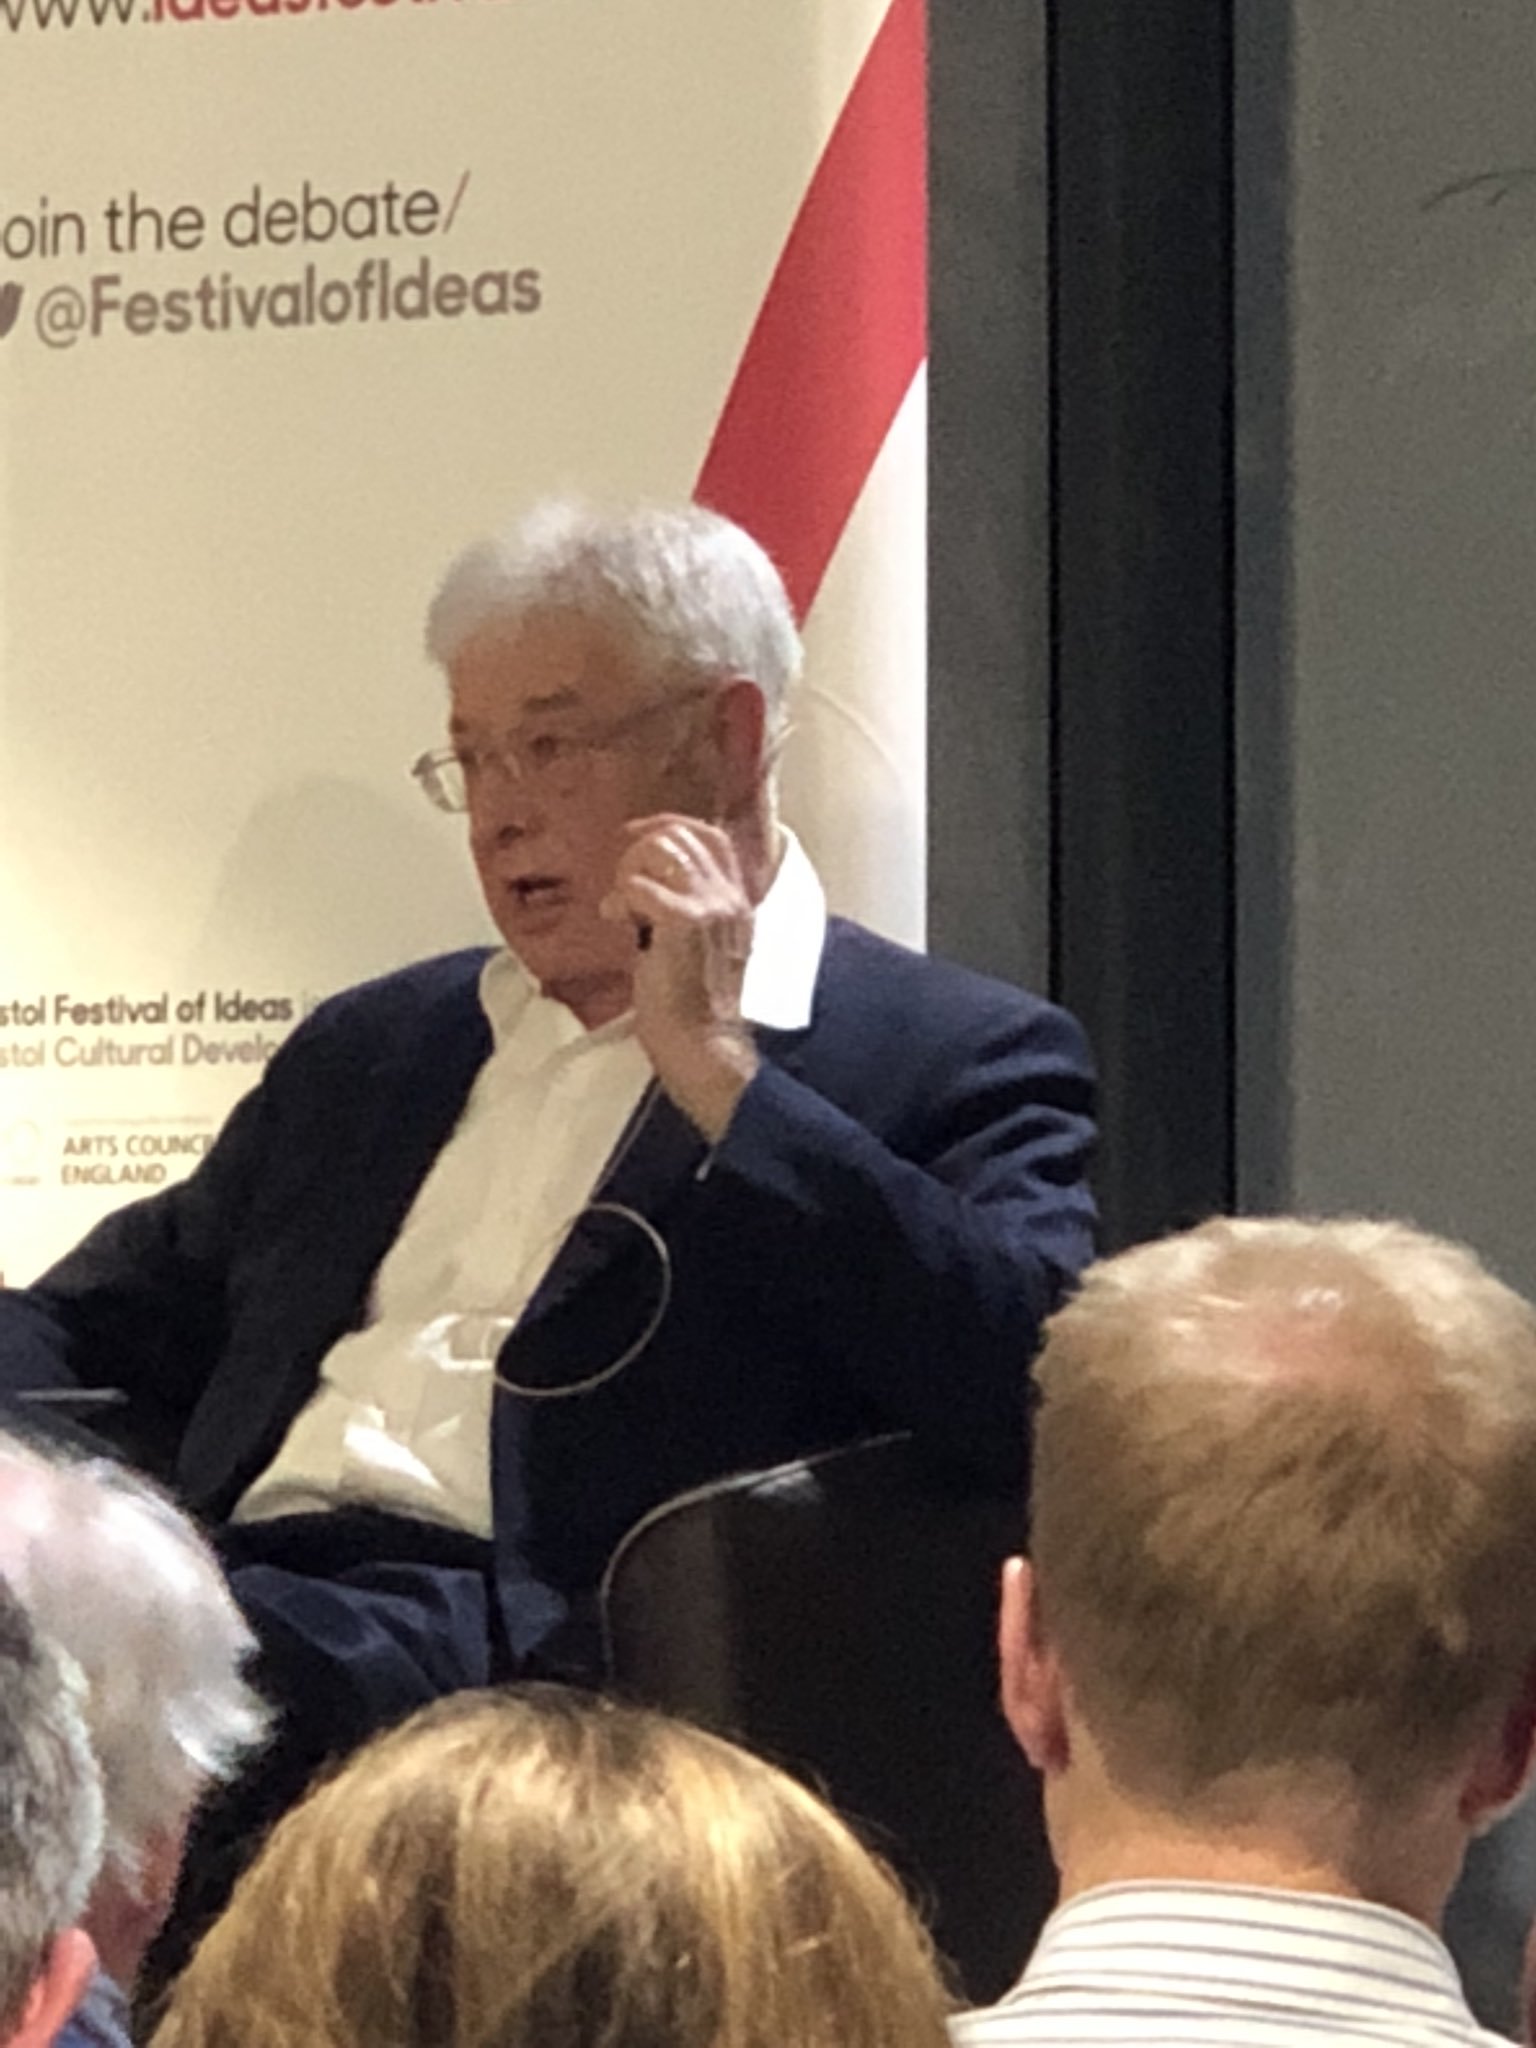 Alan Winters from @uk_tpo says it’s easy for UK to get a trade deal with USA - “you just open your wallet and say how much do you want” #economicsfest https://t.co/A1pw6EpuP4